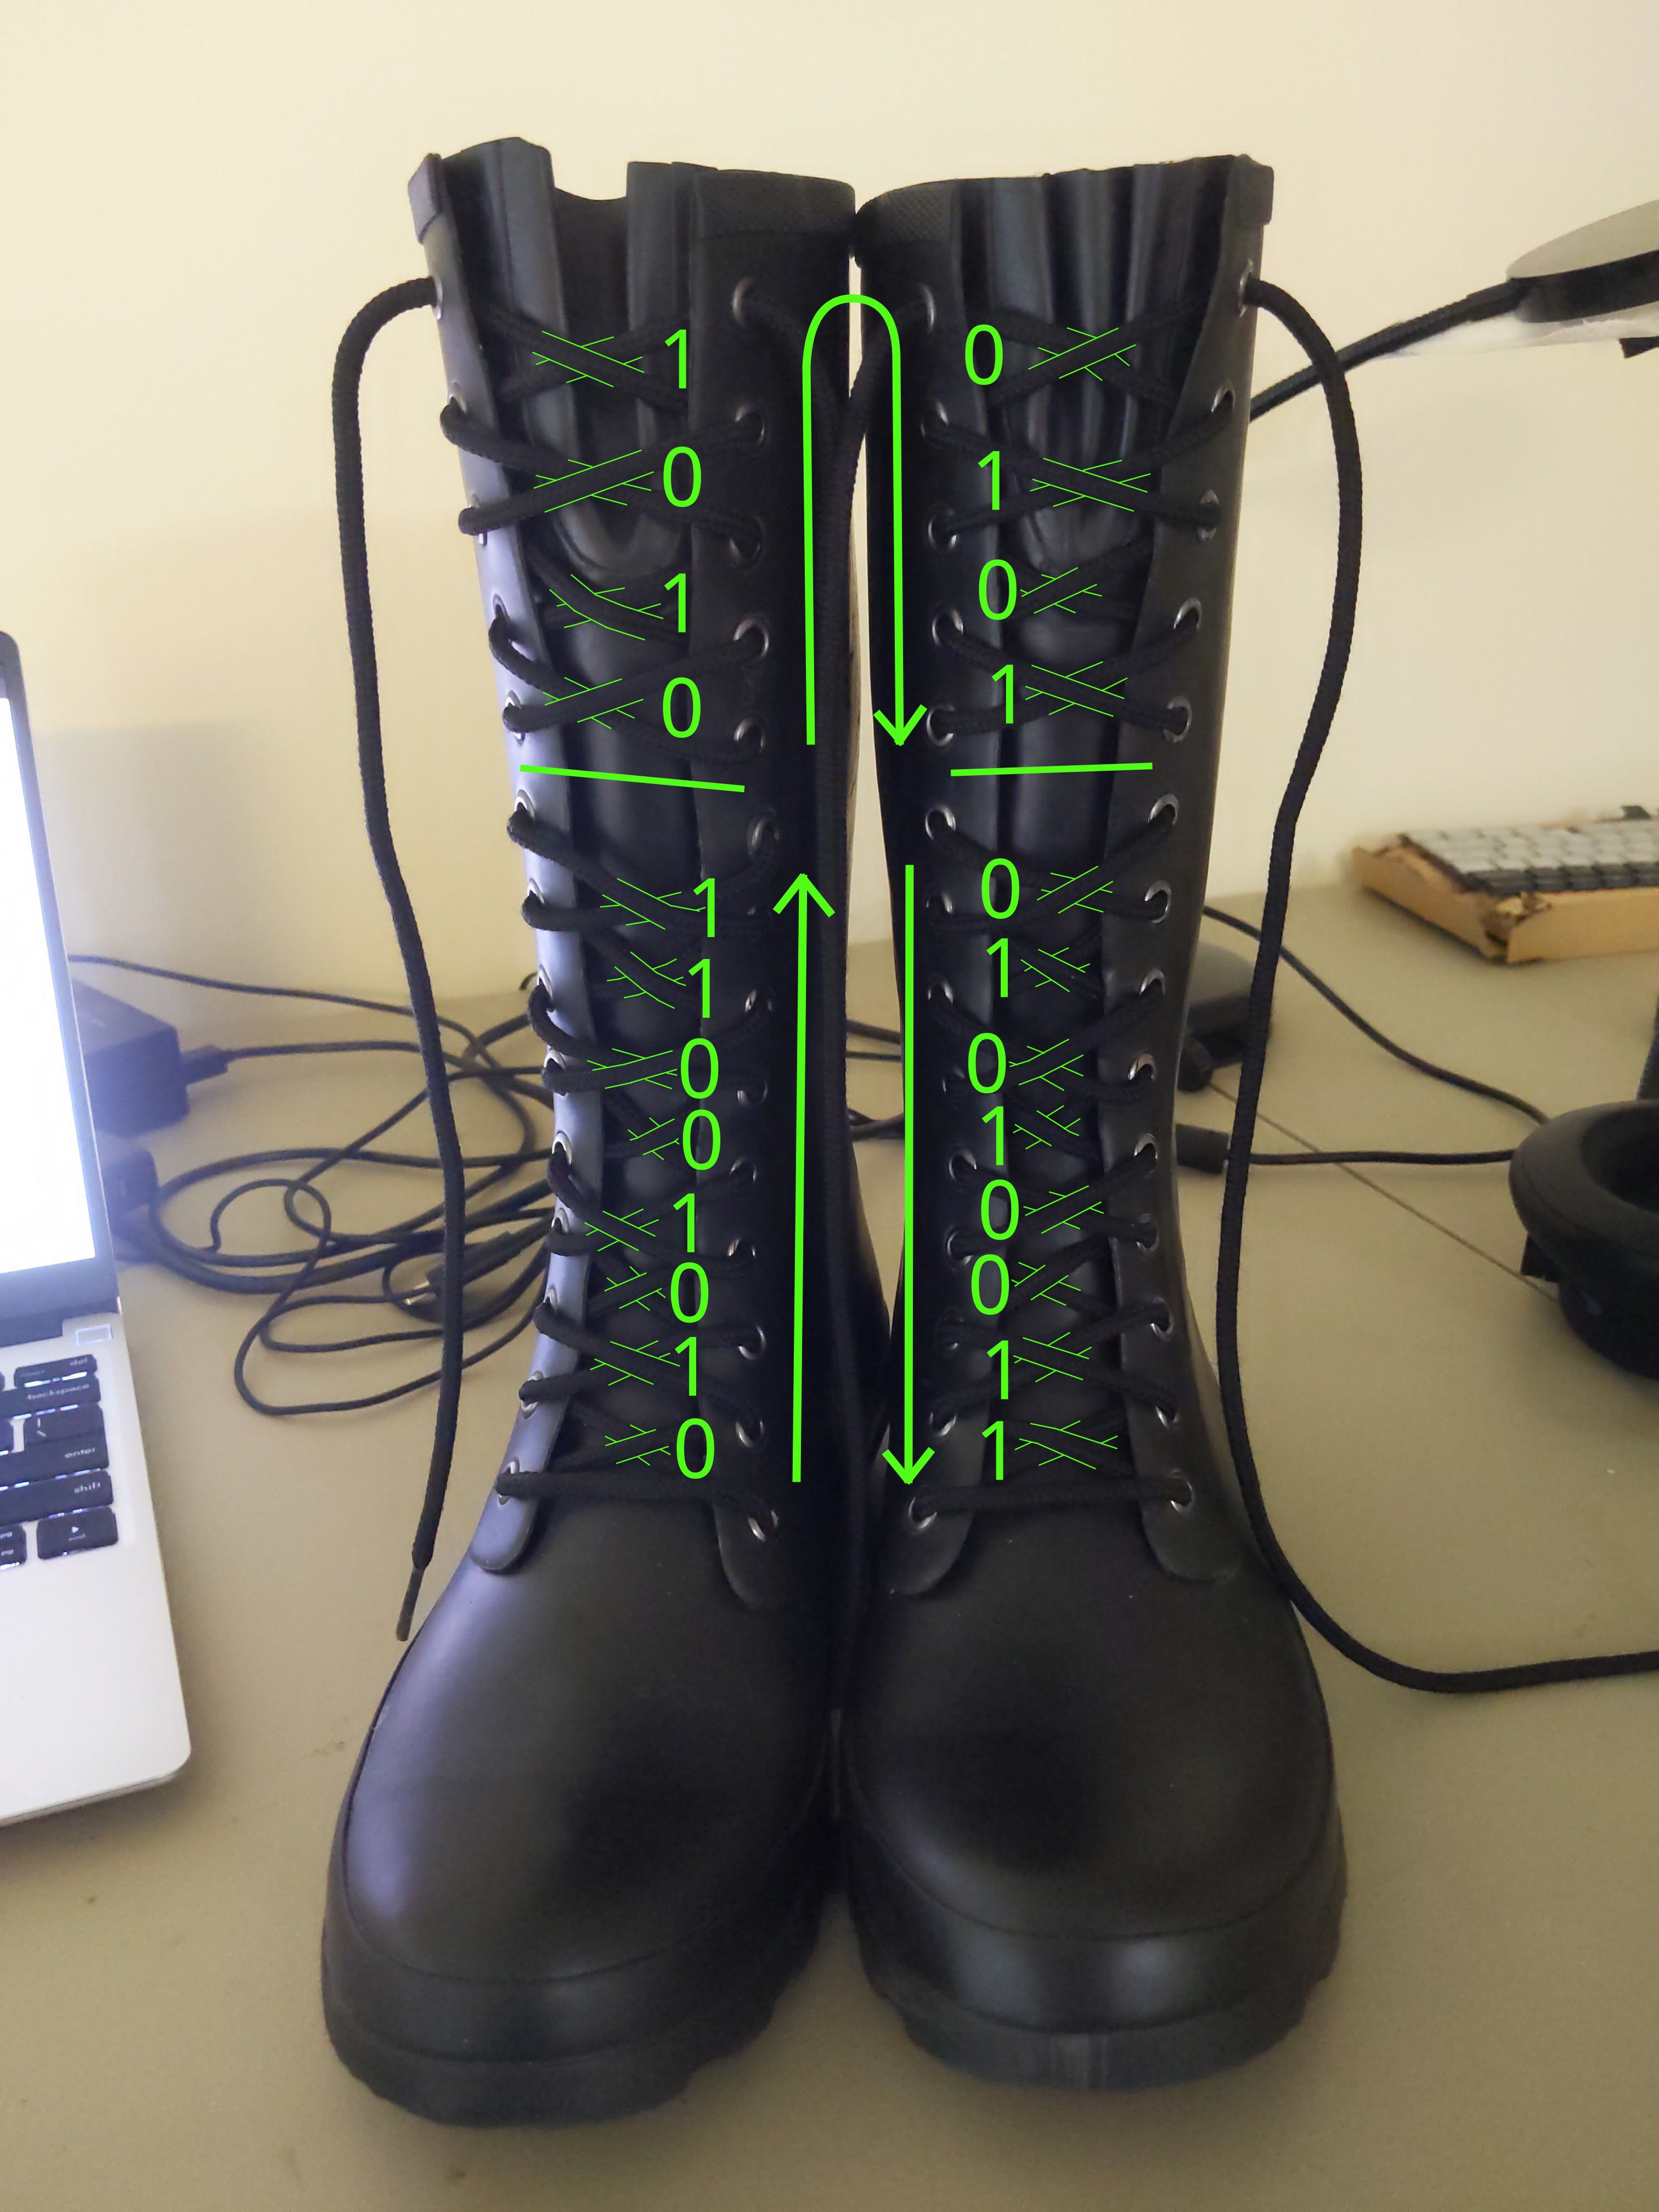 boots with laces encoding data: 01010011 01010101 01010011